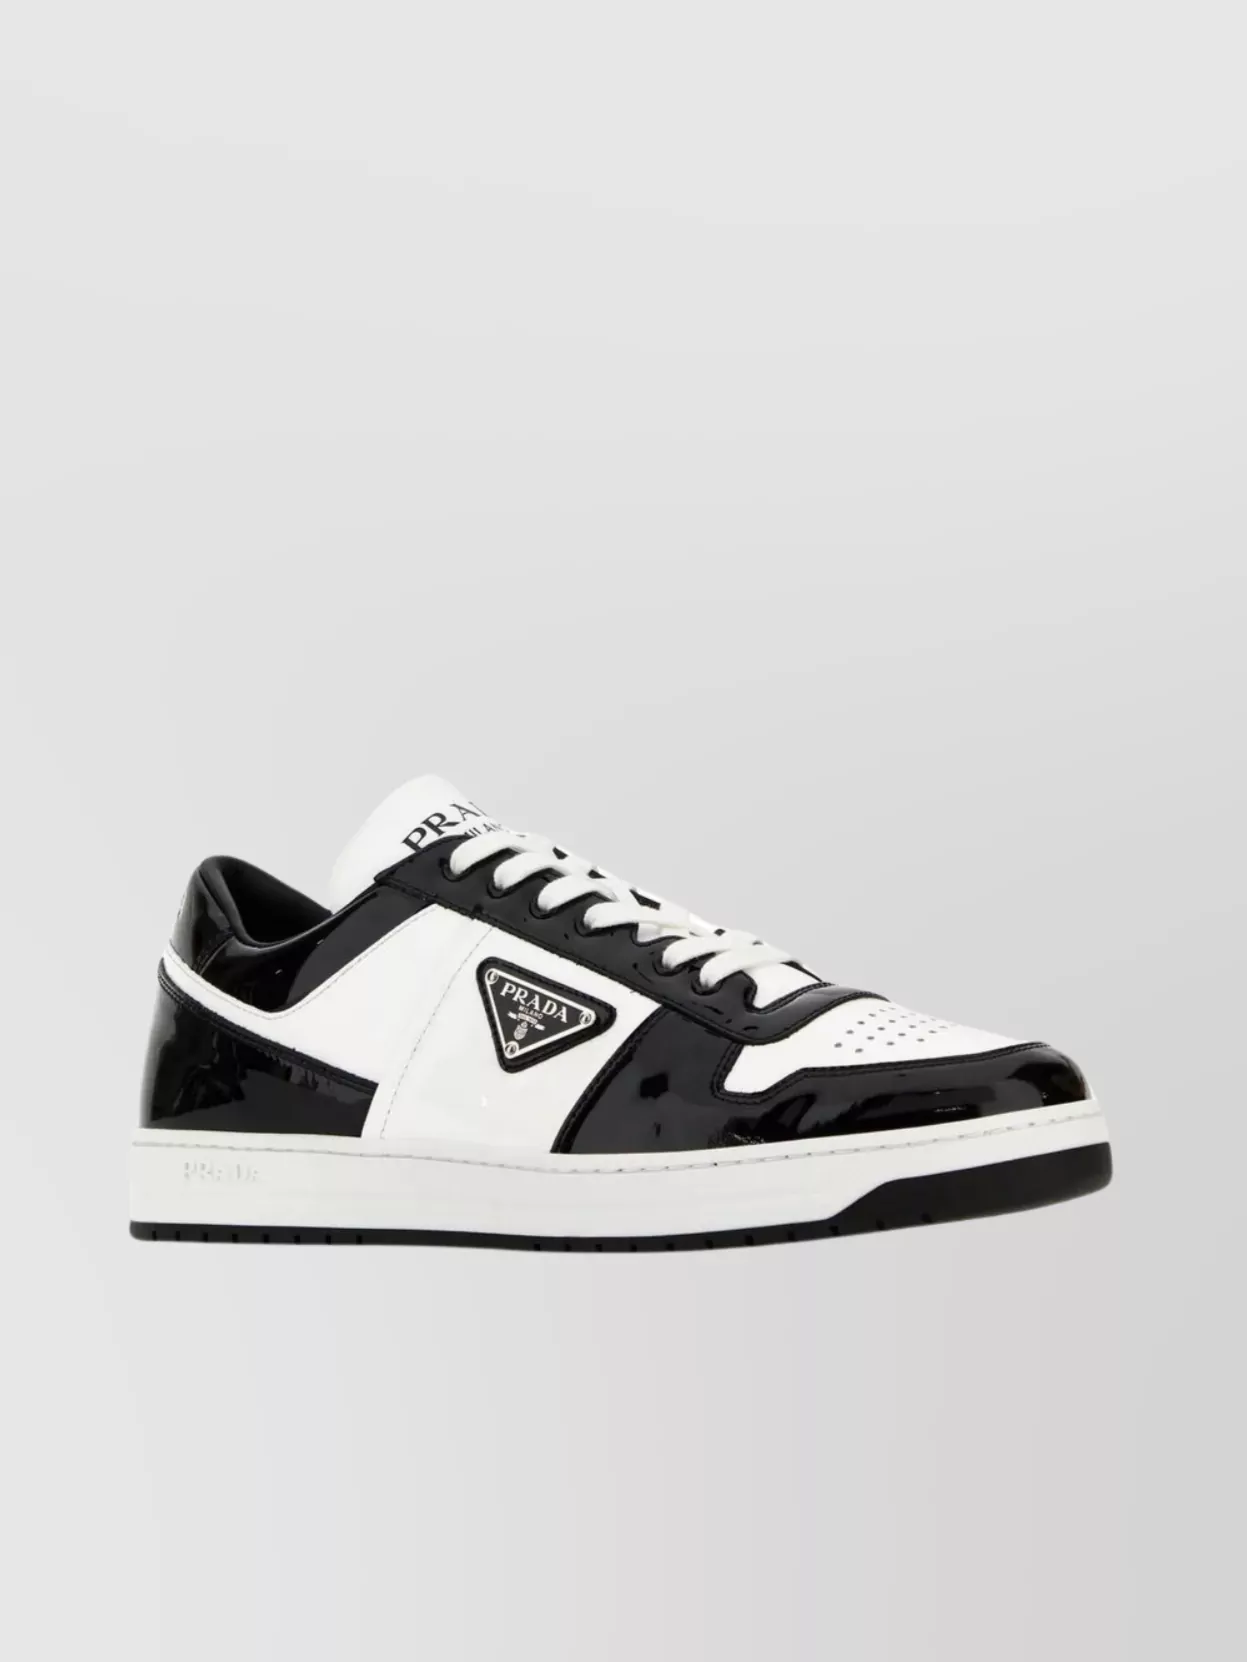 Shop Prada Two-tone Leather Downtown Sneakers